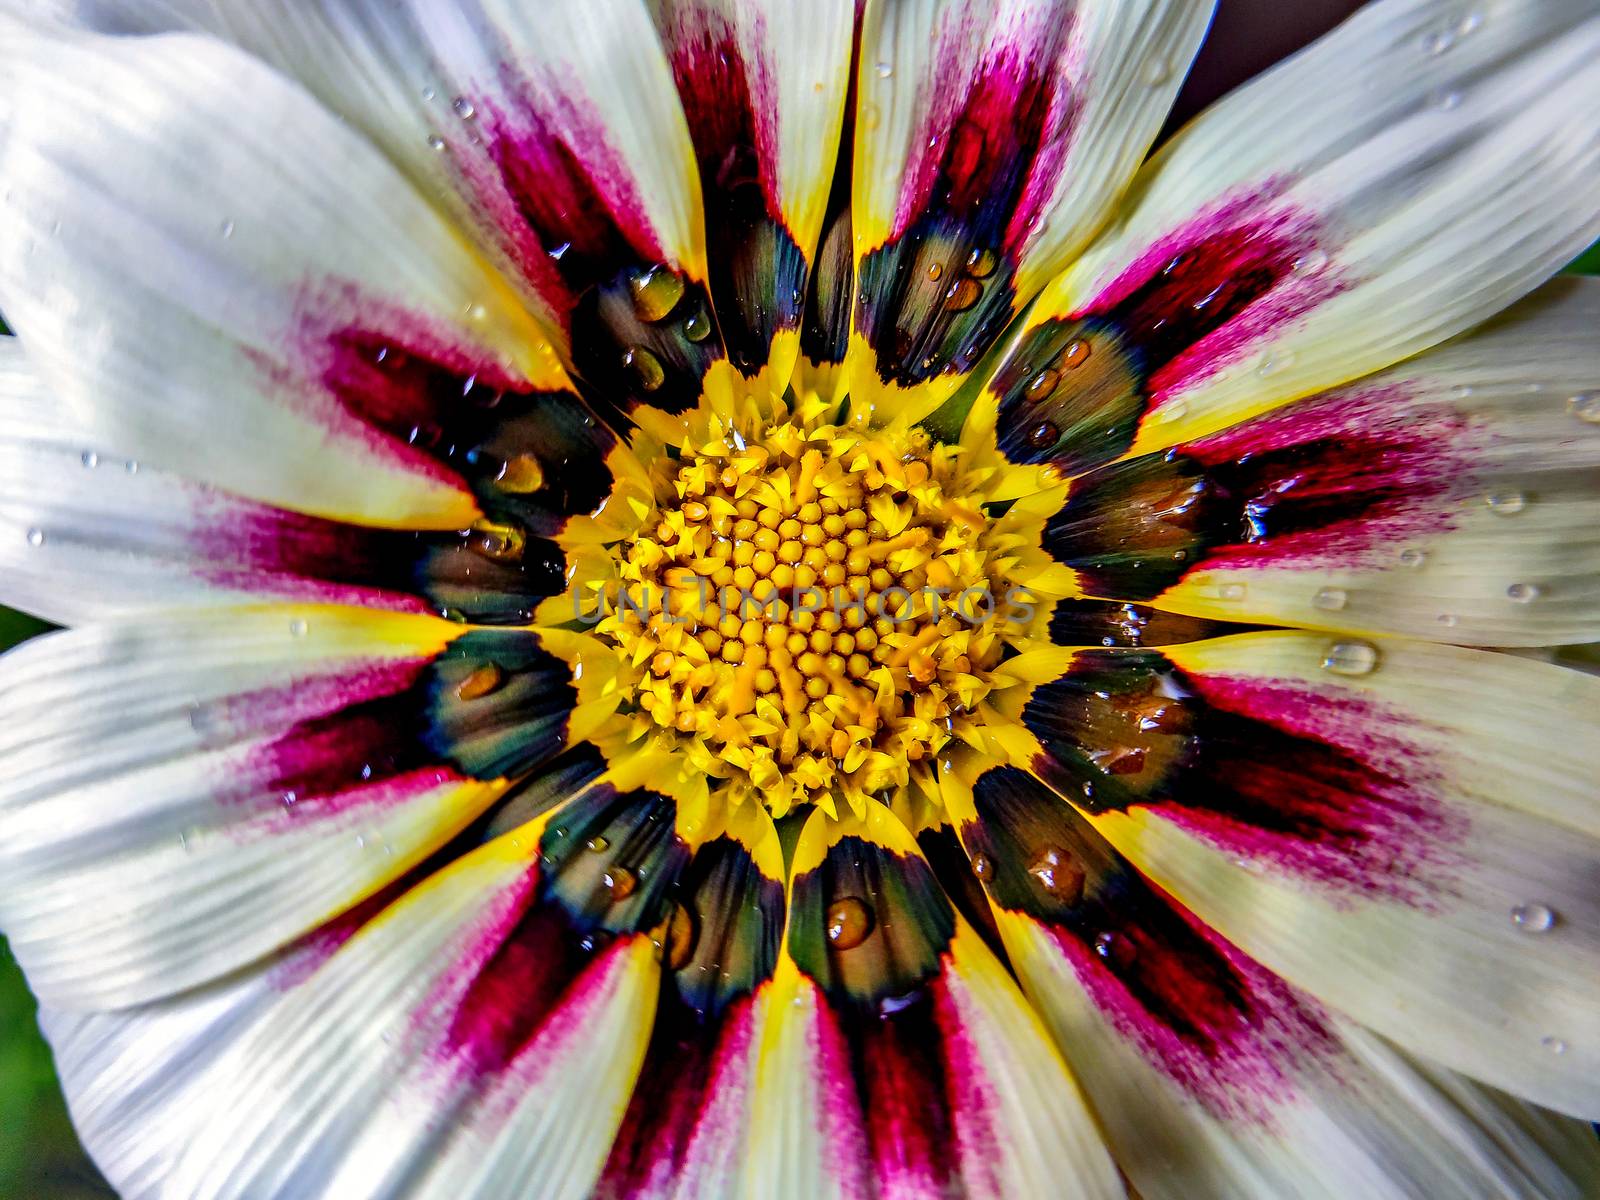 Isolated, close-up image of white & pink petals of Gazania flower with yellow center and water droplets.